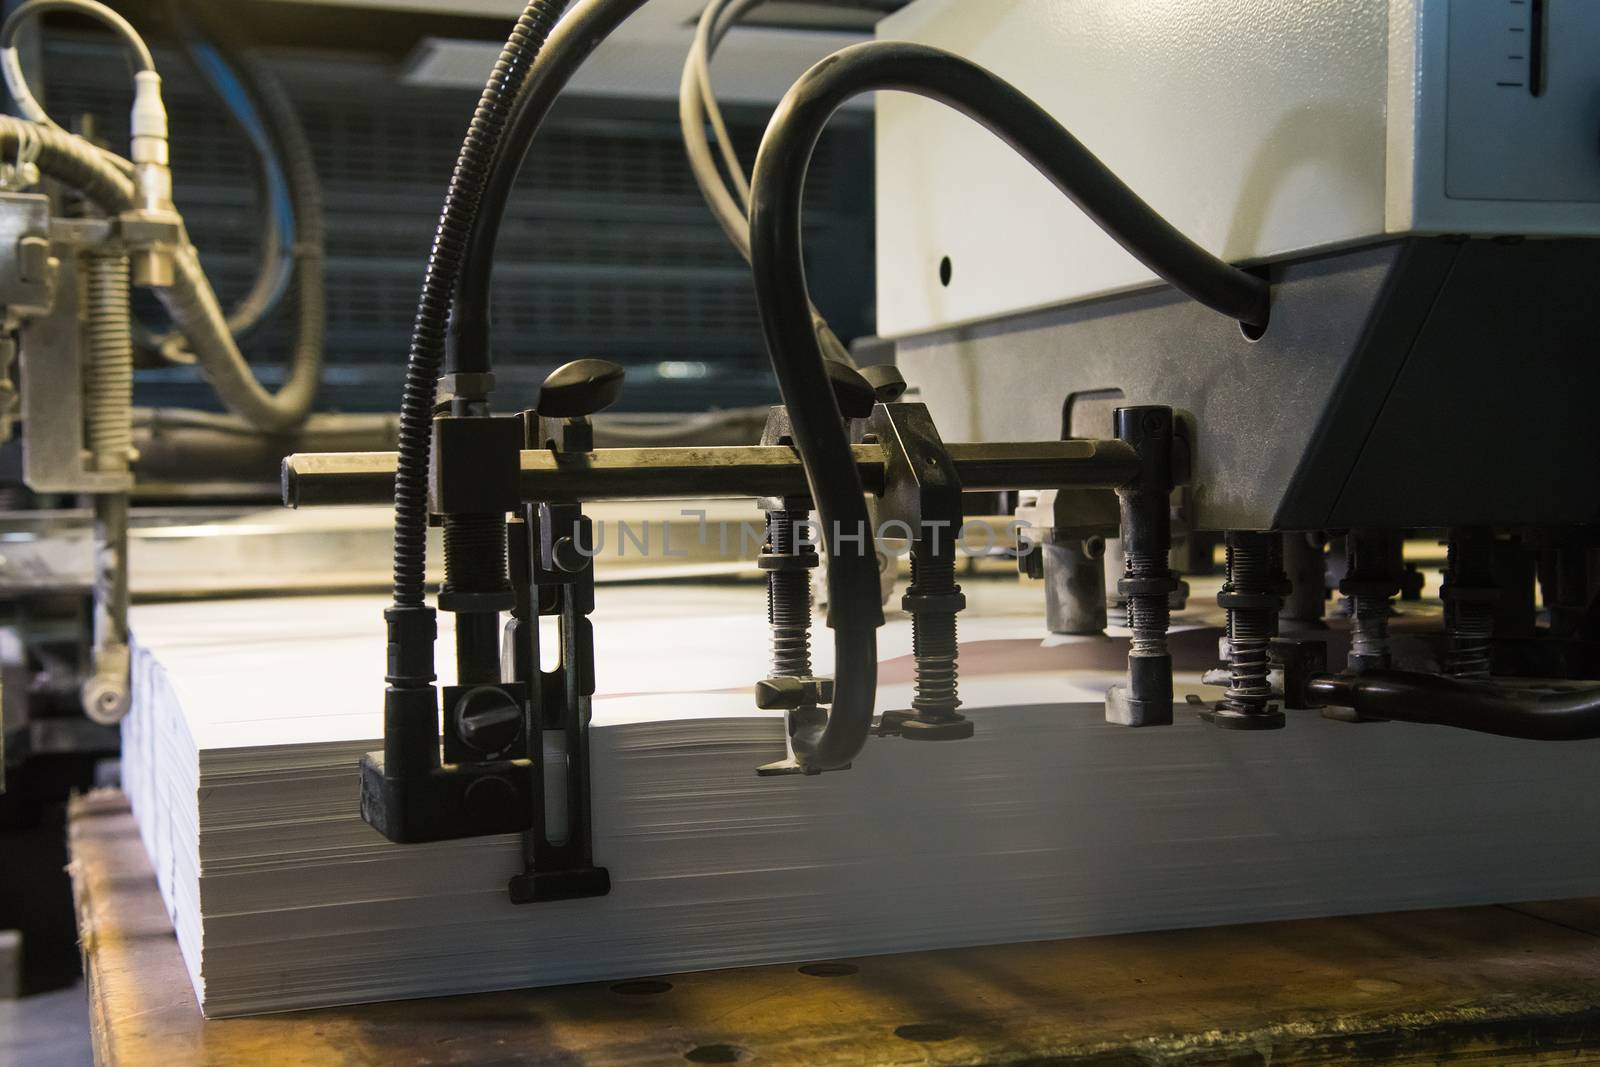 Printing presses at work in the printing by grigorenko